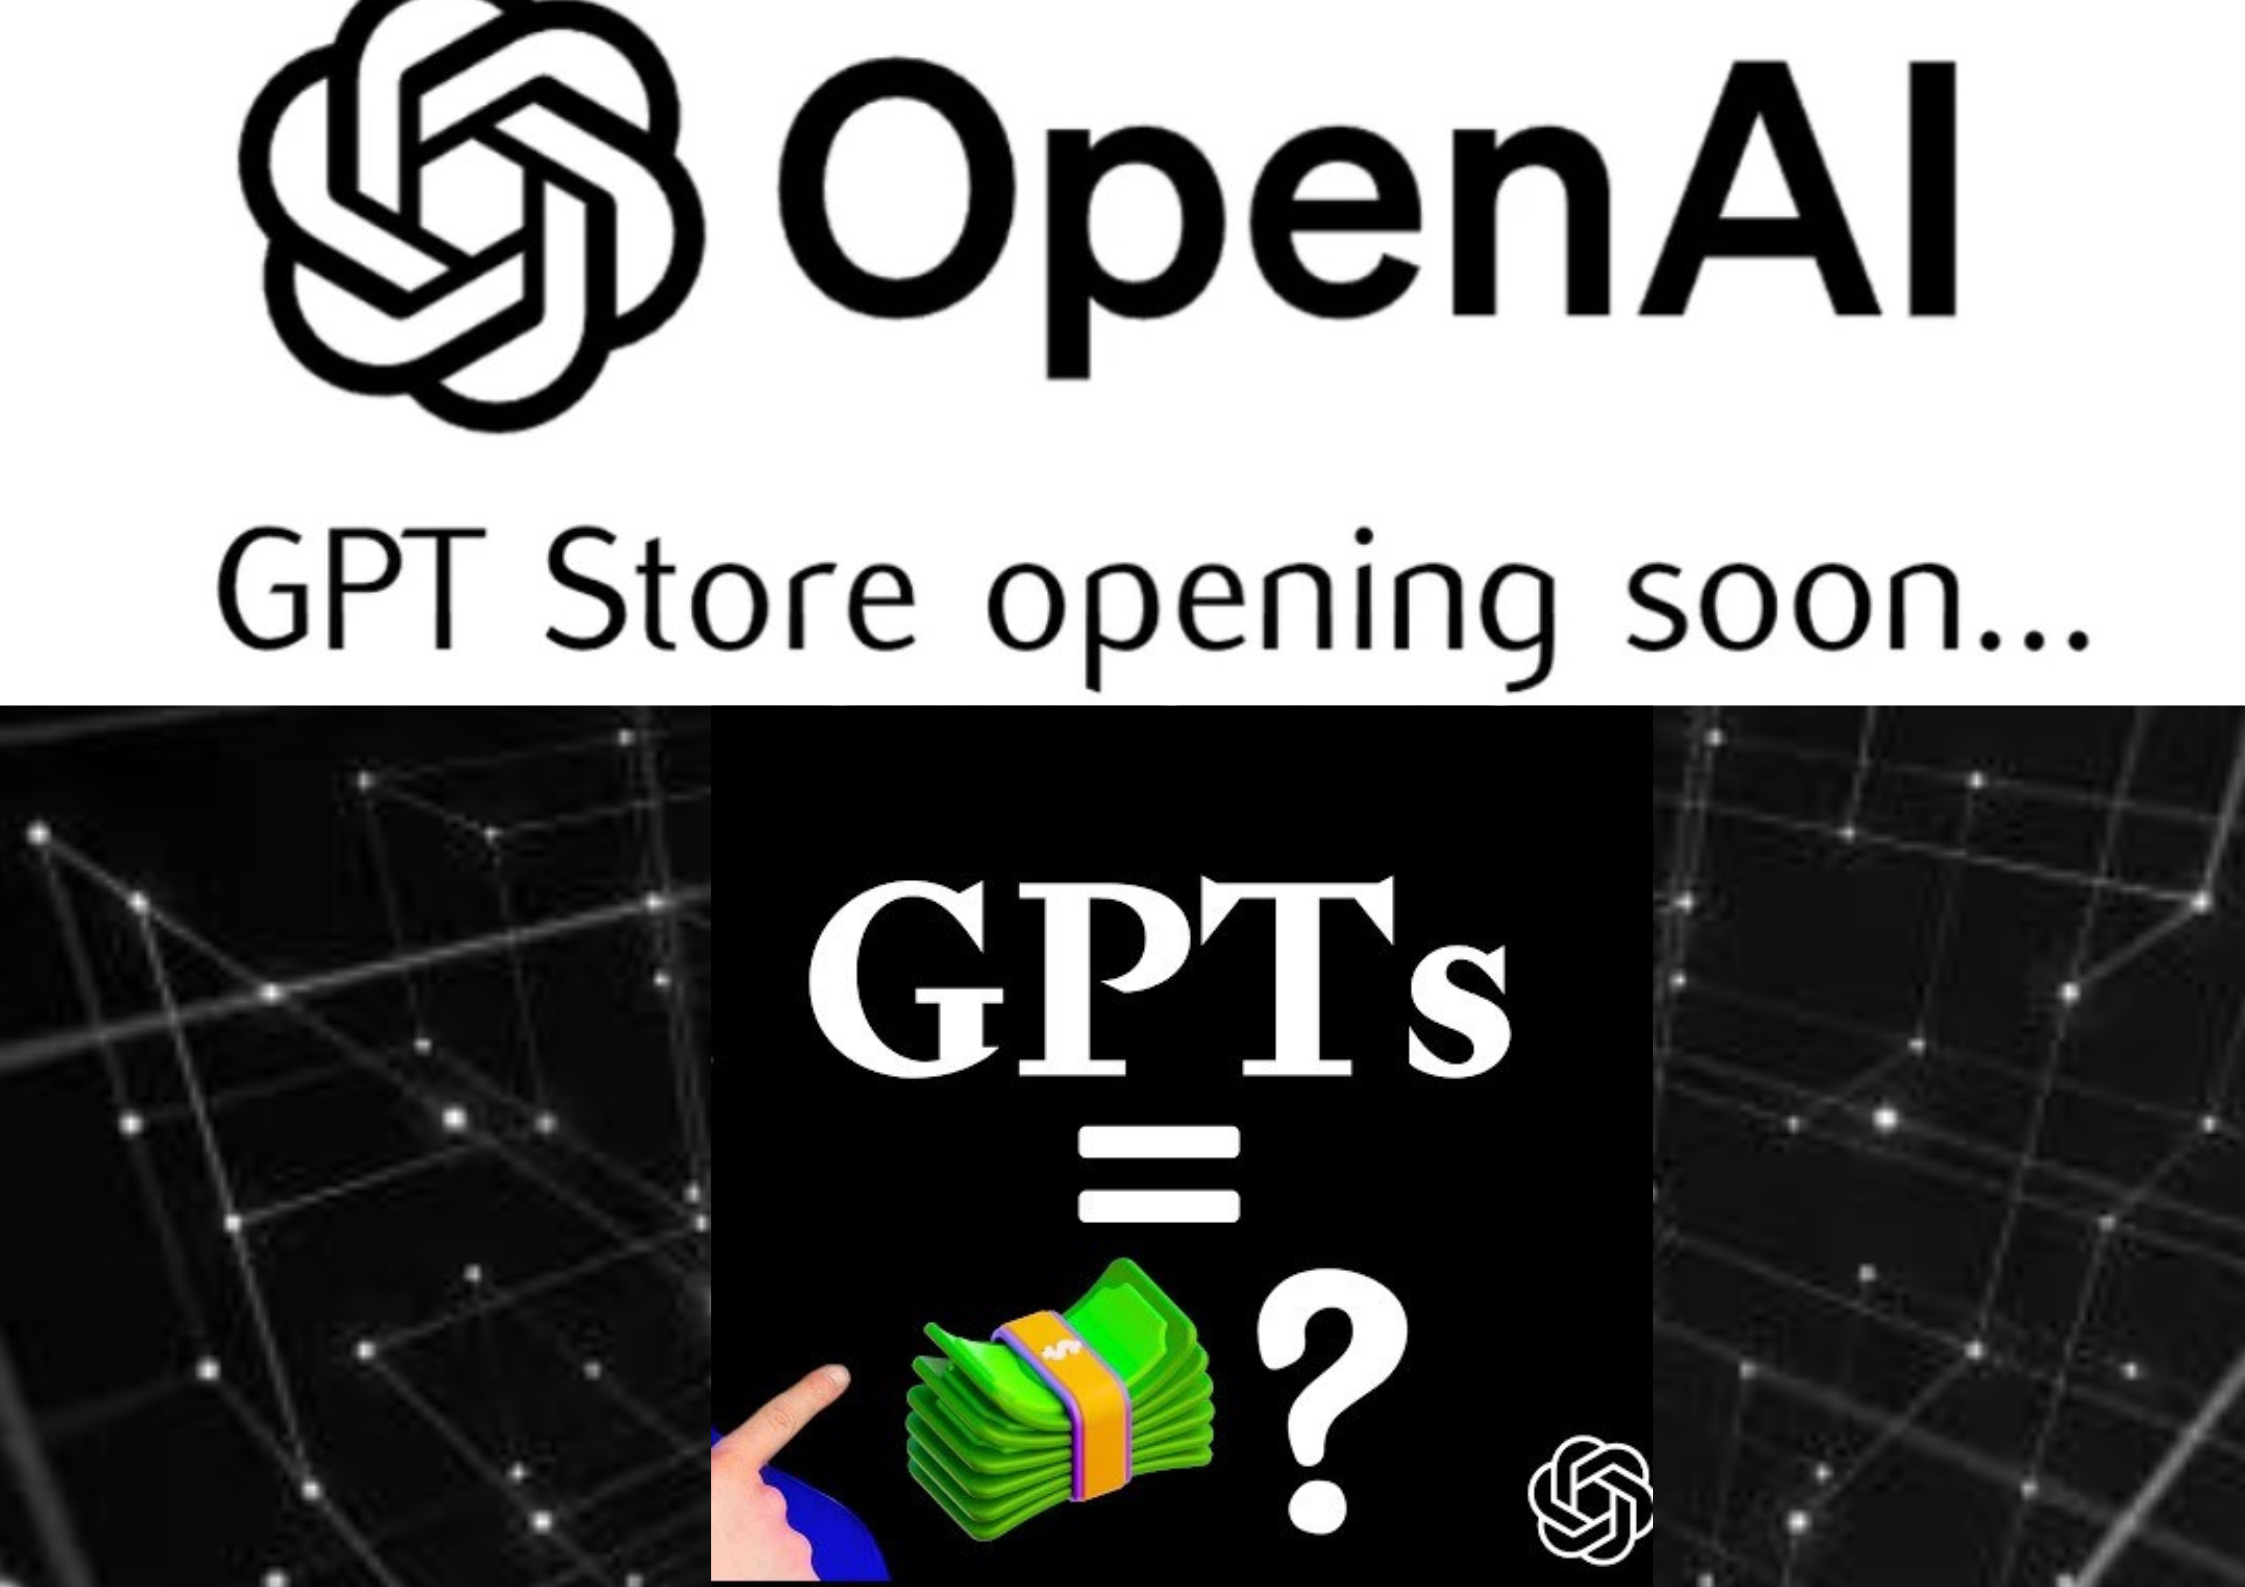 OpenAI's GPT Store Aims to Create Profitable and Enjoyable AI for All